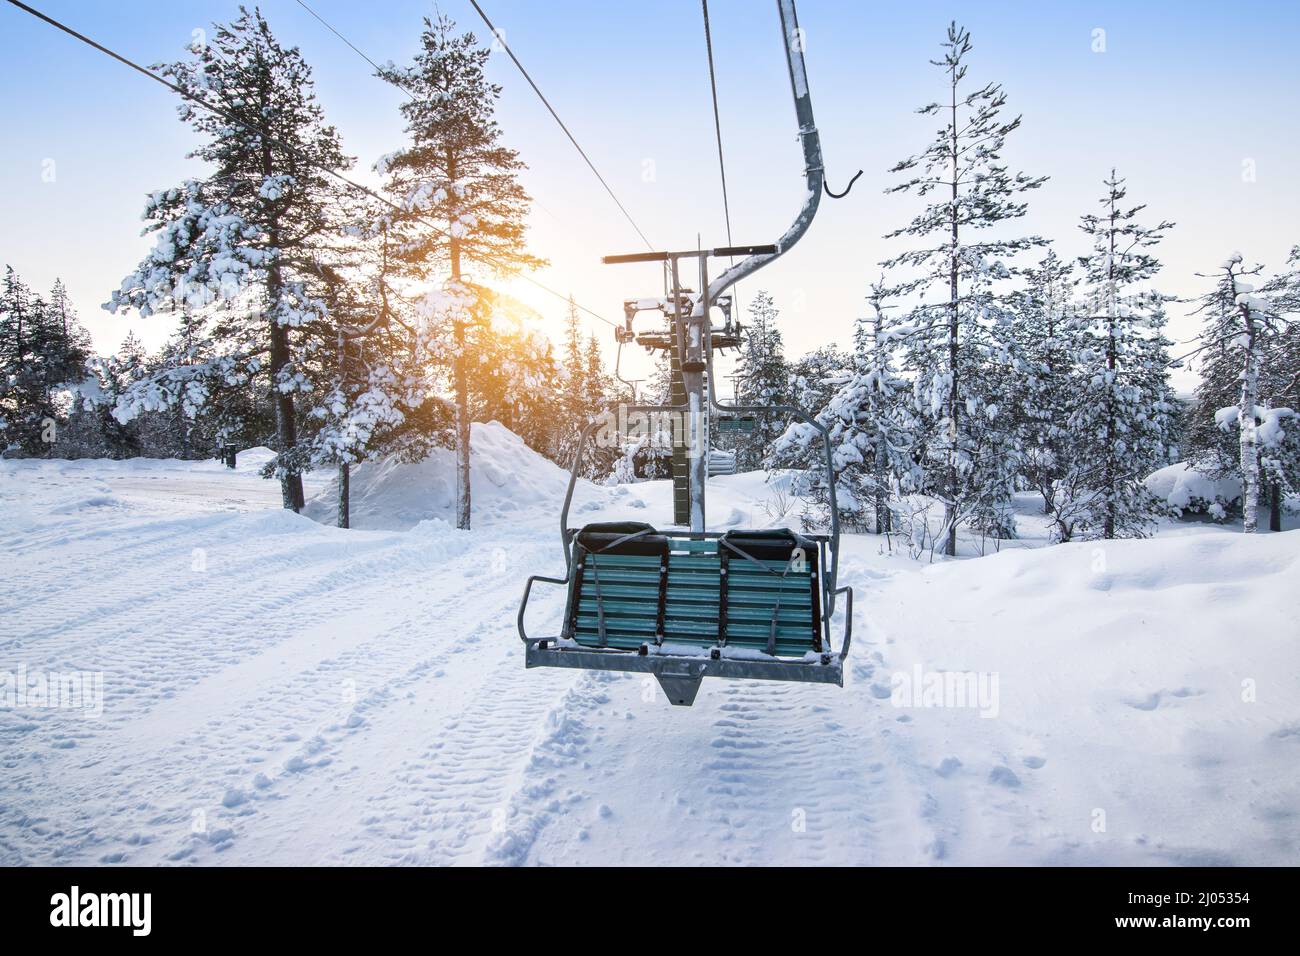 Ski lift at sunrise in the beautiful snowy nature of Lapland. Stock Photo